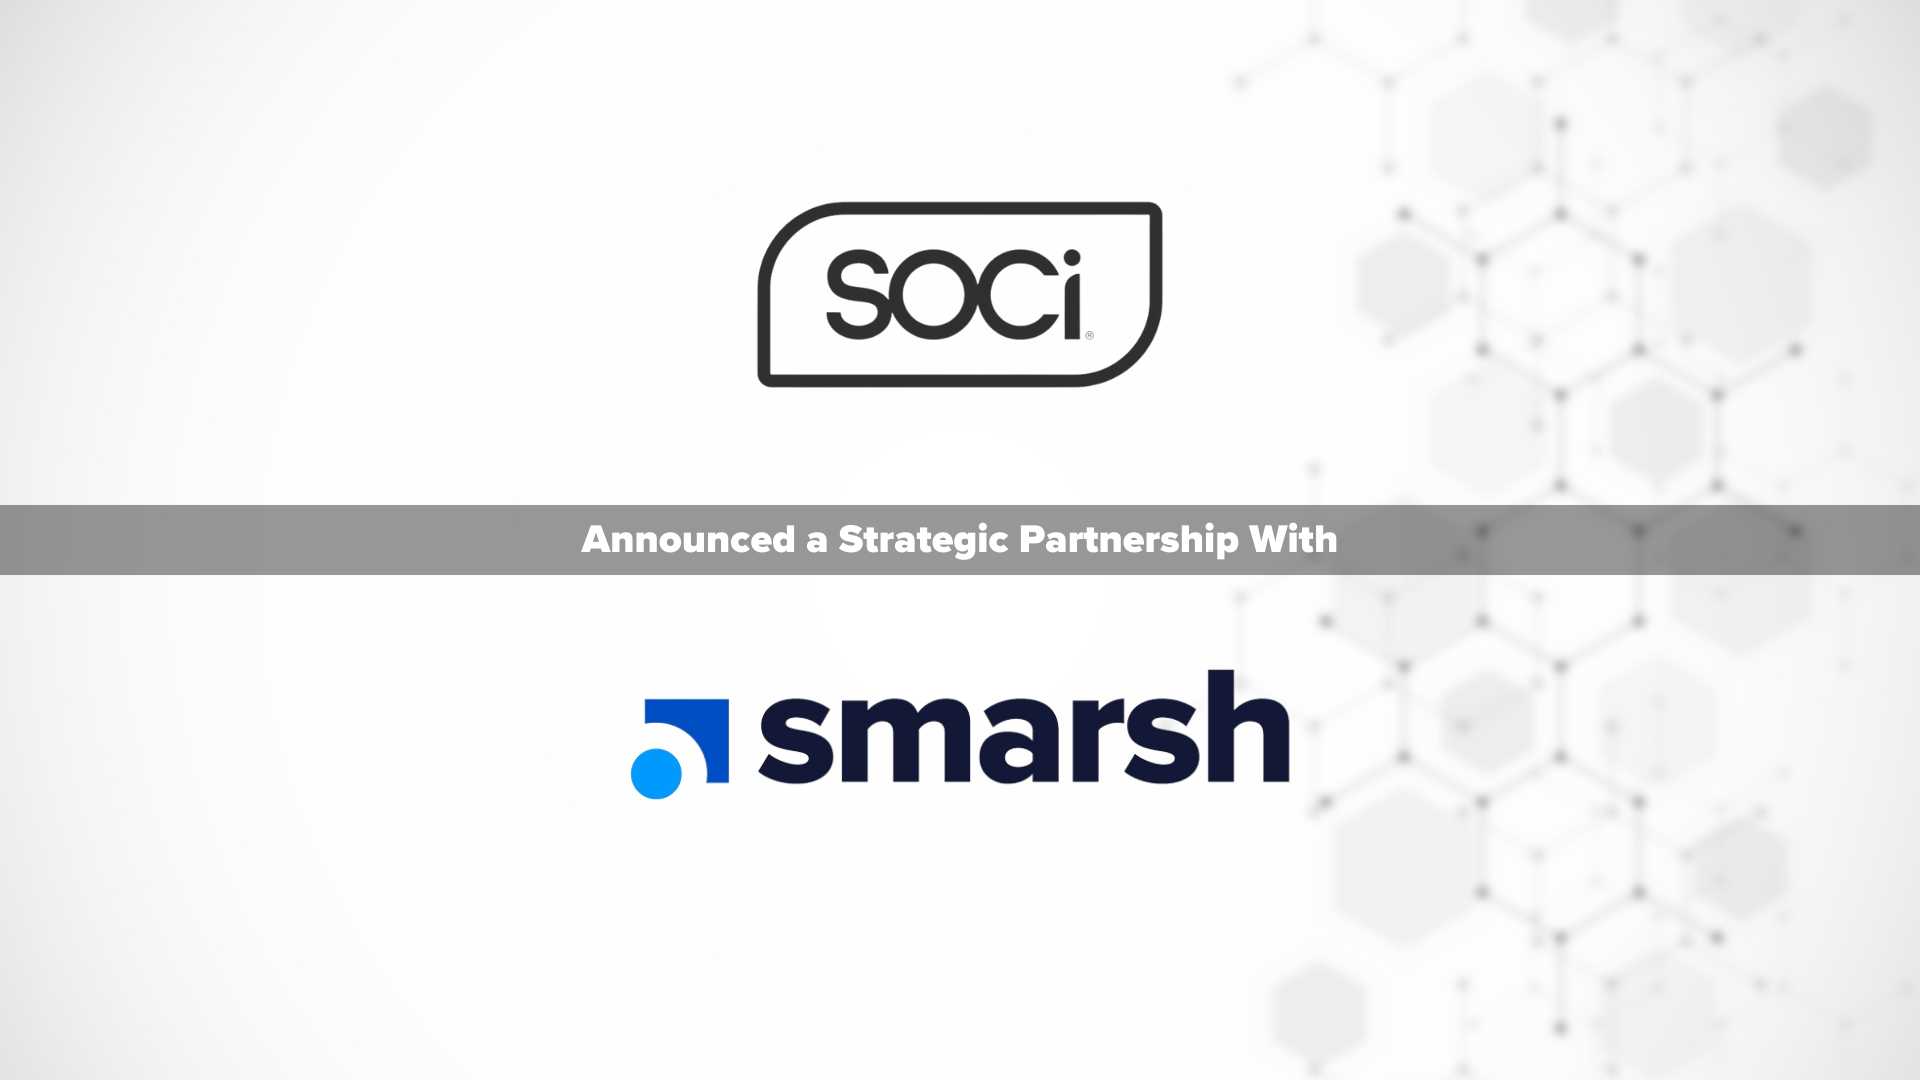 With New Strategic Partnership, SOCi, Smarsh Aim to Streamline Social Management, Archiving for Regulated Industries